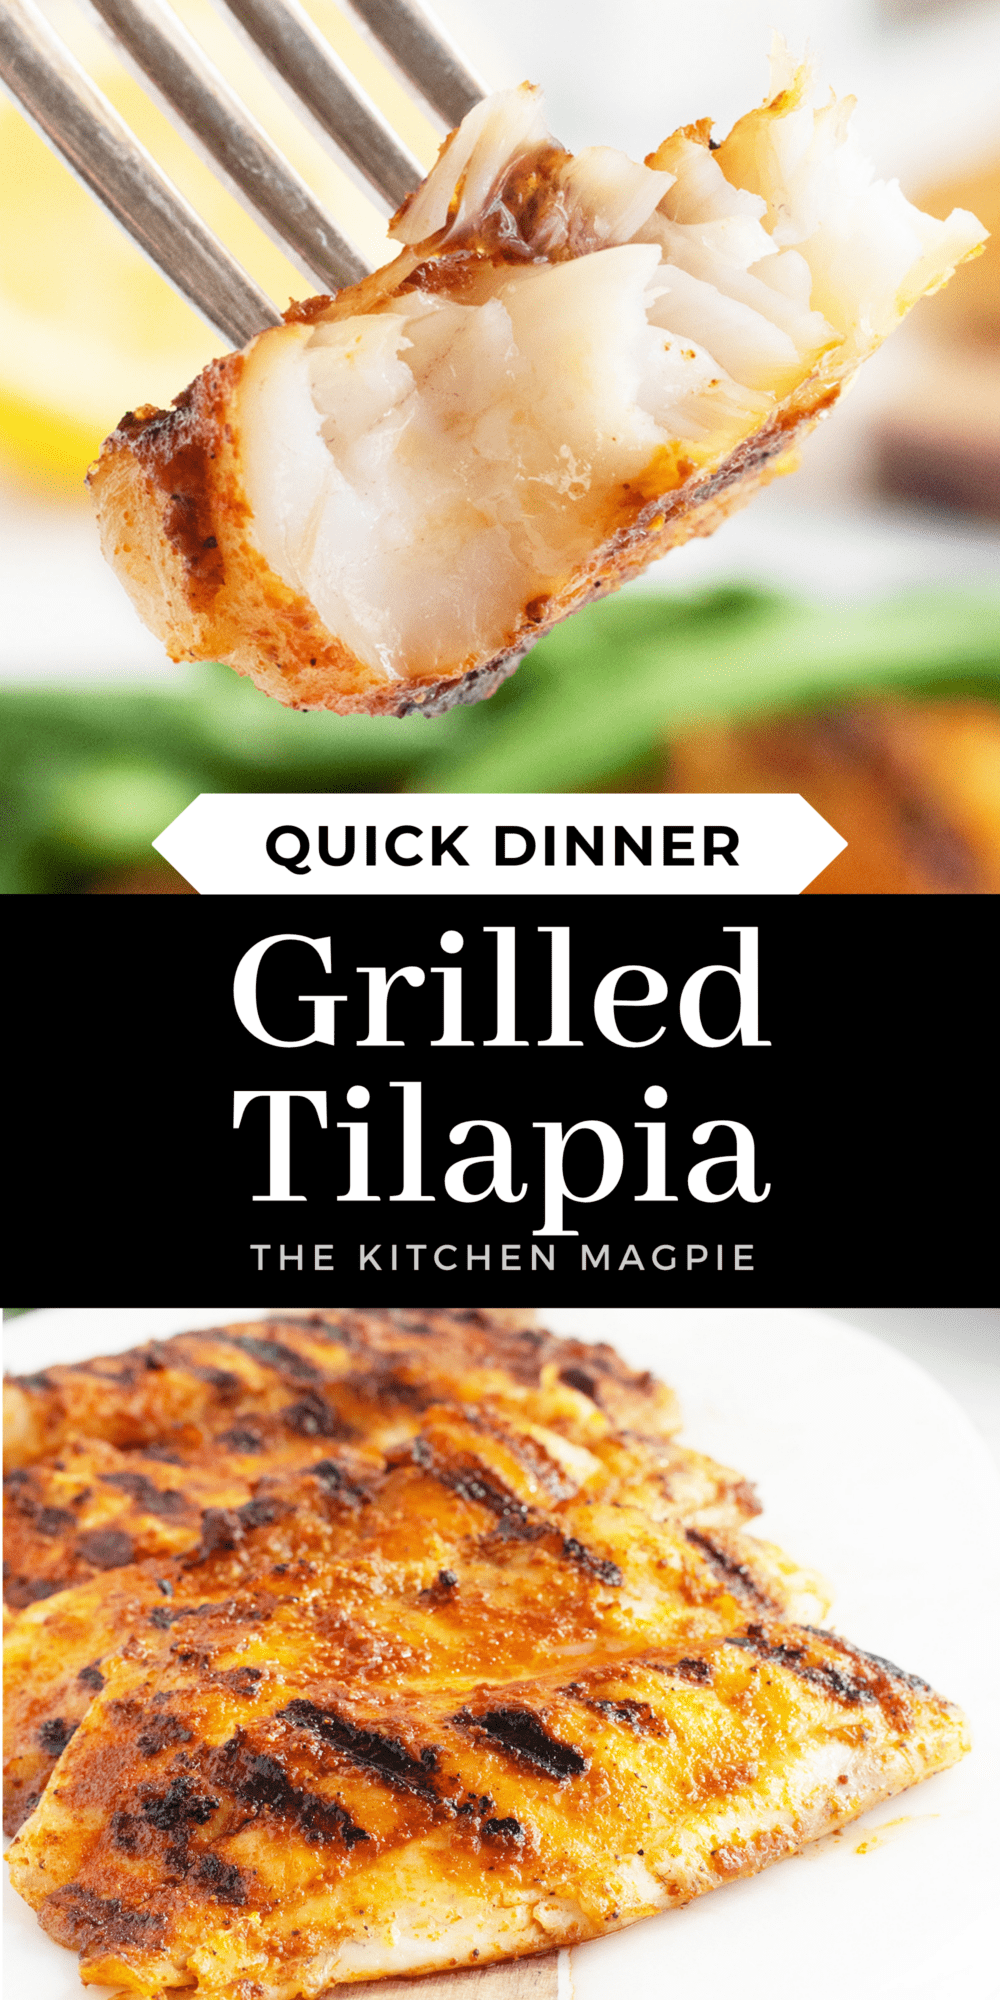 Tilapia can actually be an incredibly flavorful and rich fish when cooked properly, and grilling it is an easy dinner!